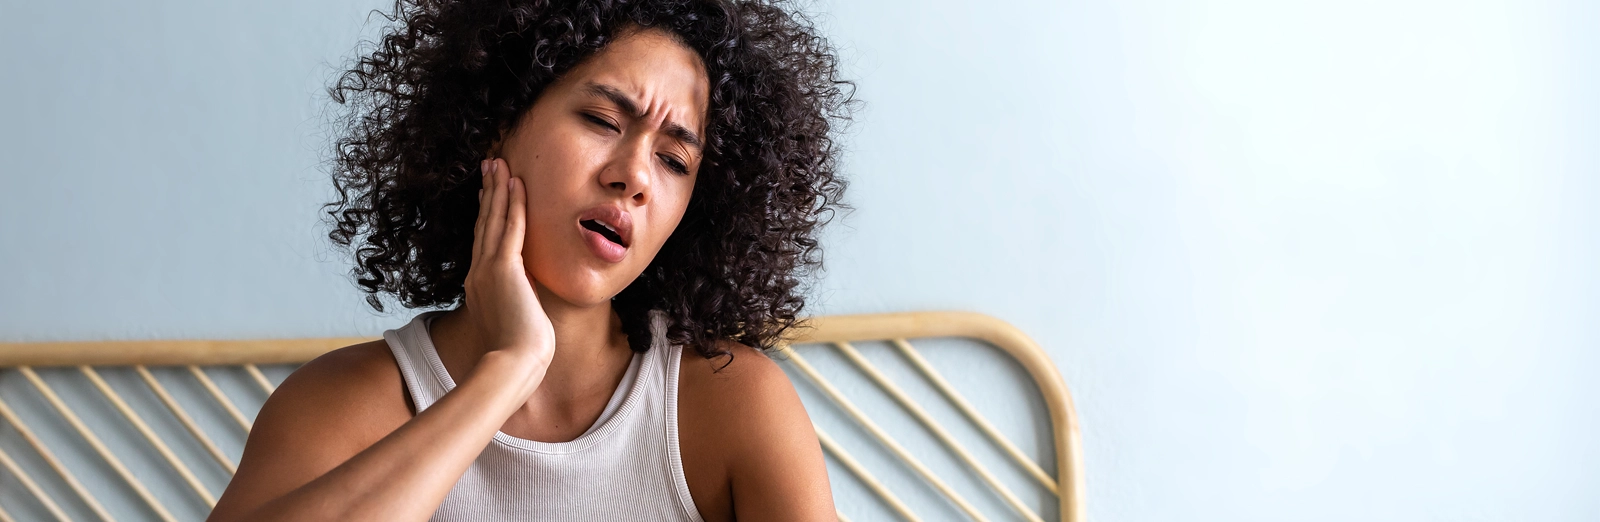 woman-holding-her-jaw-in-pain-1600x522.webp